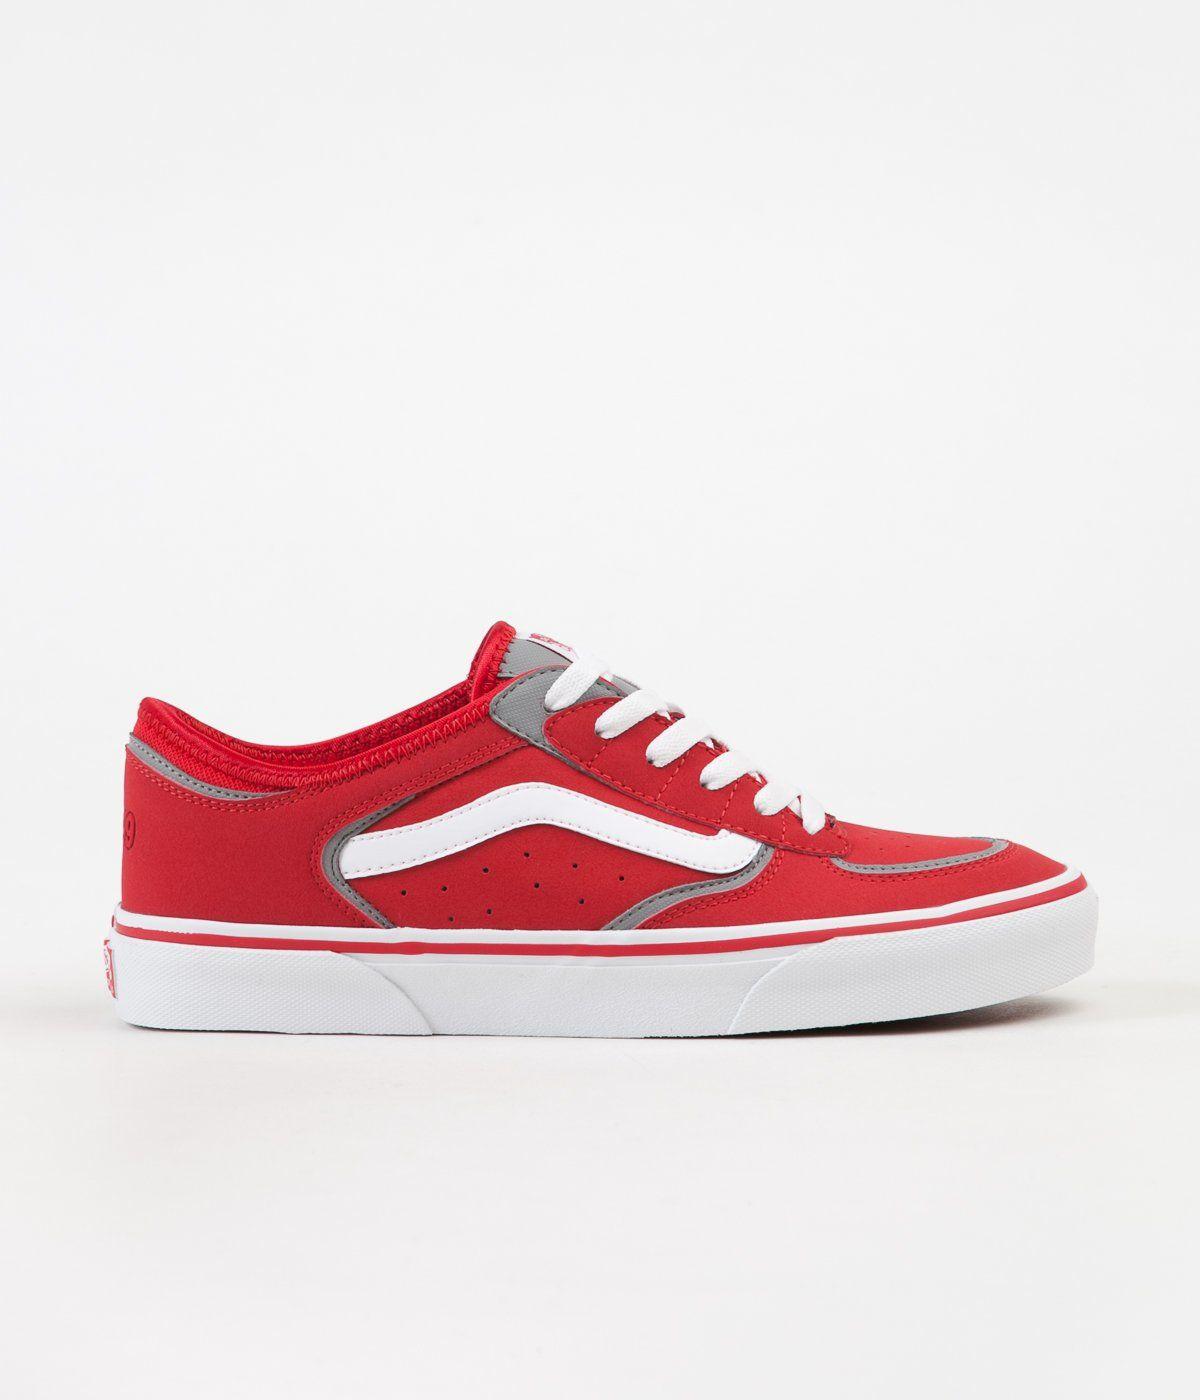 Red White Vans Logo - Vans Rowley Classic LX Shoes Red / White